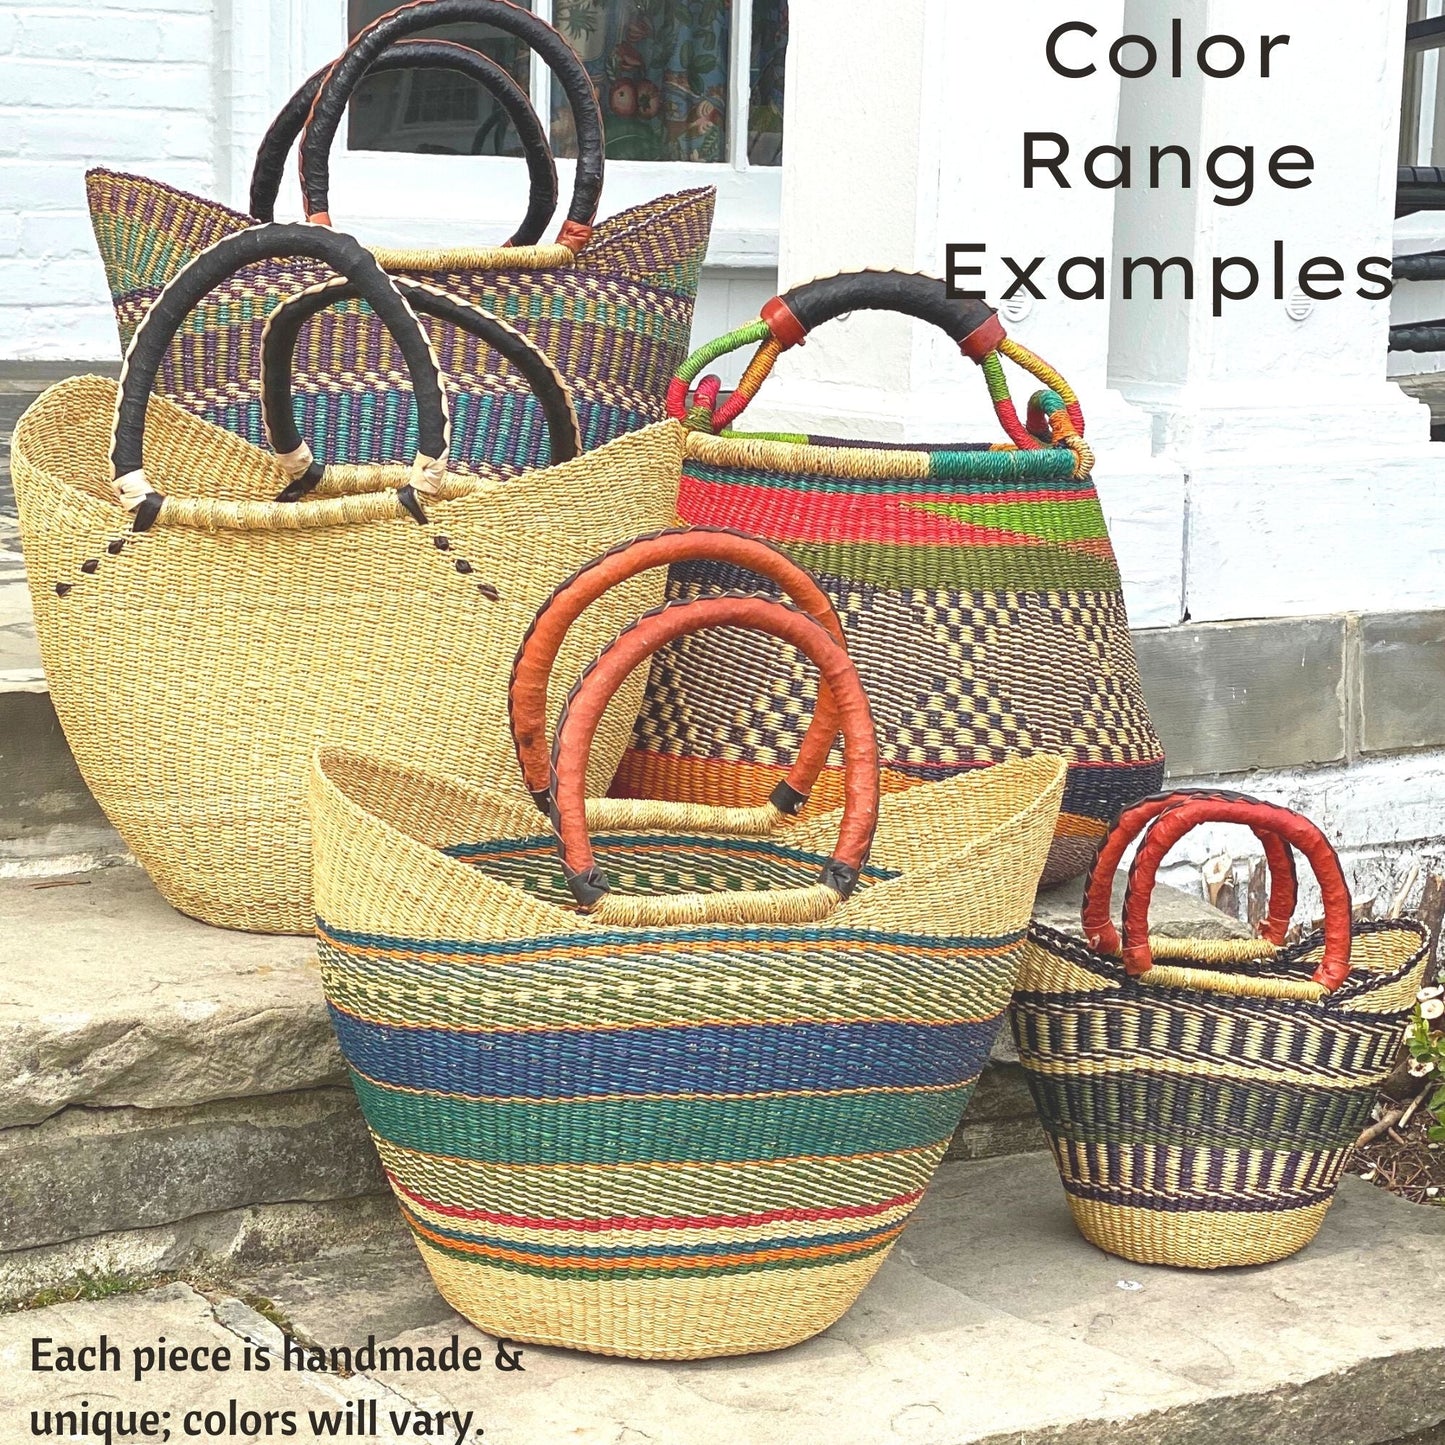 Bolga Tote, Mixed Colors with Leather Handle 16”to 18” by 11” to 13”